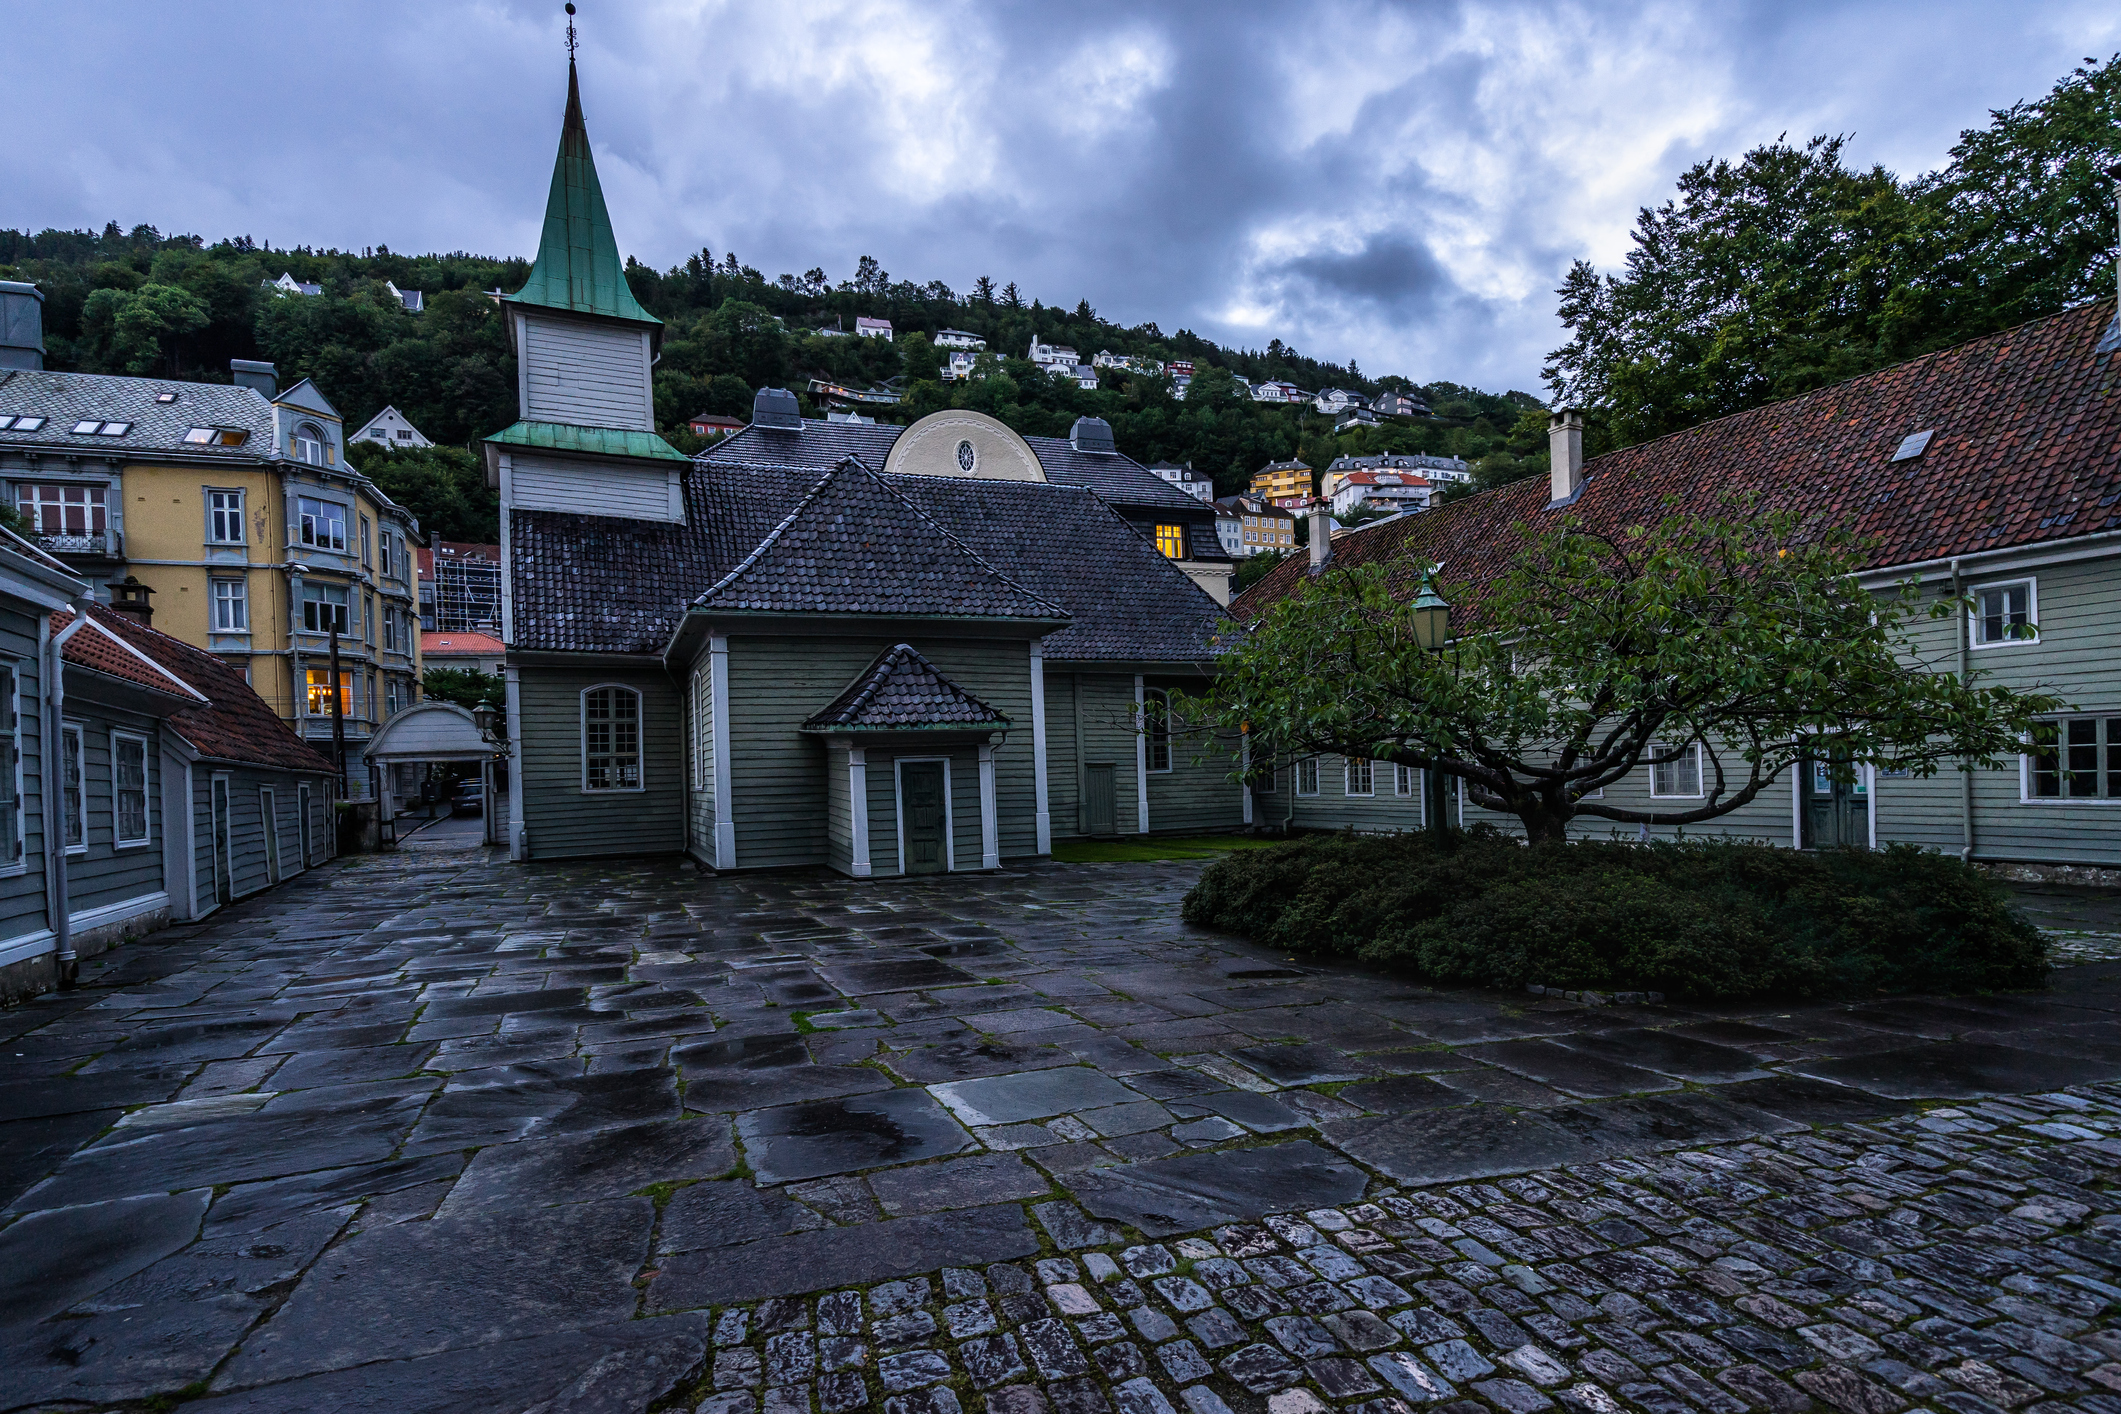 Yard of the Leprosy Museum, former St. Jorgen hospital, a typical Norwegian building in Bergen old town, Norway